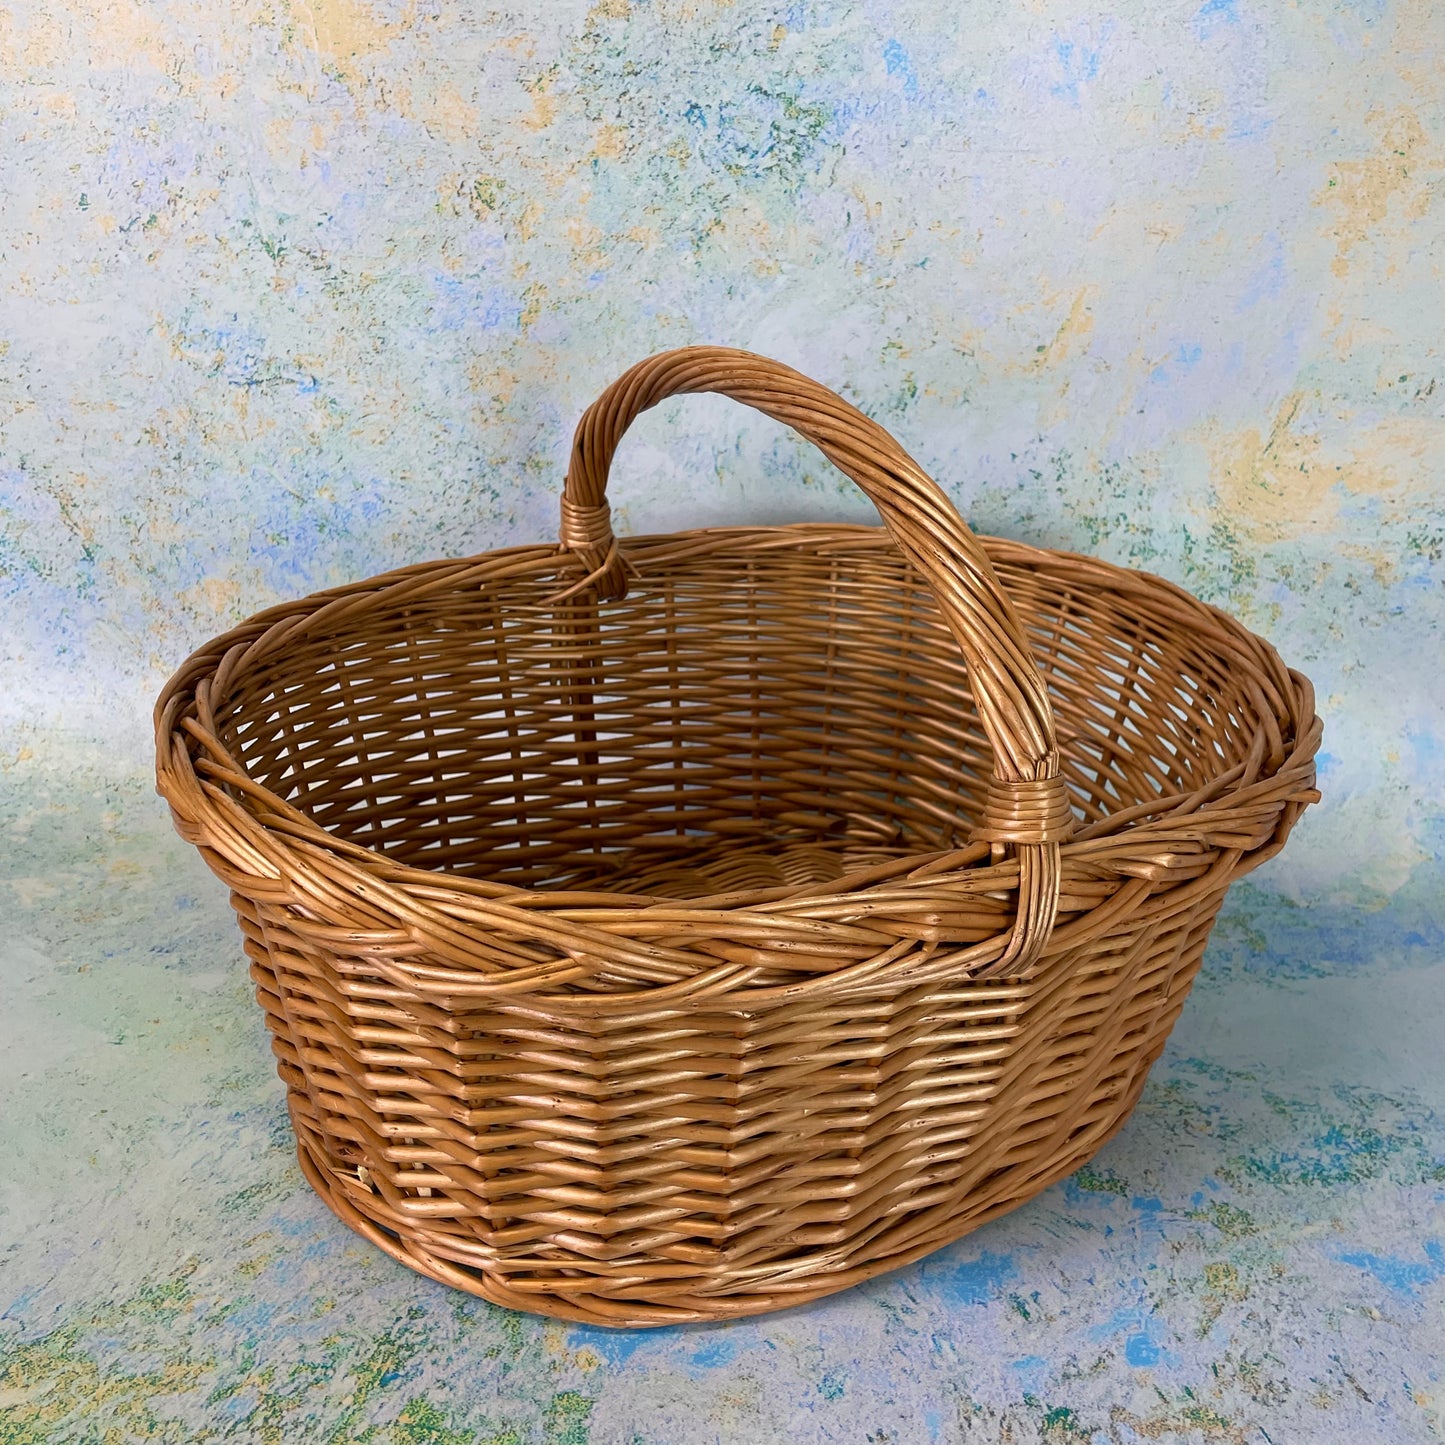 Country Woven Shopping Basket